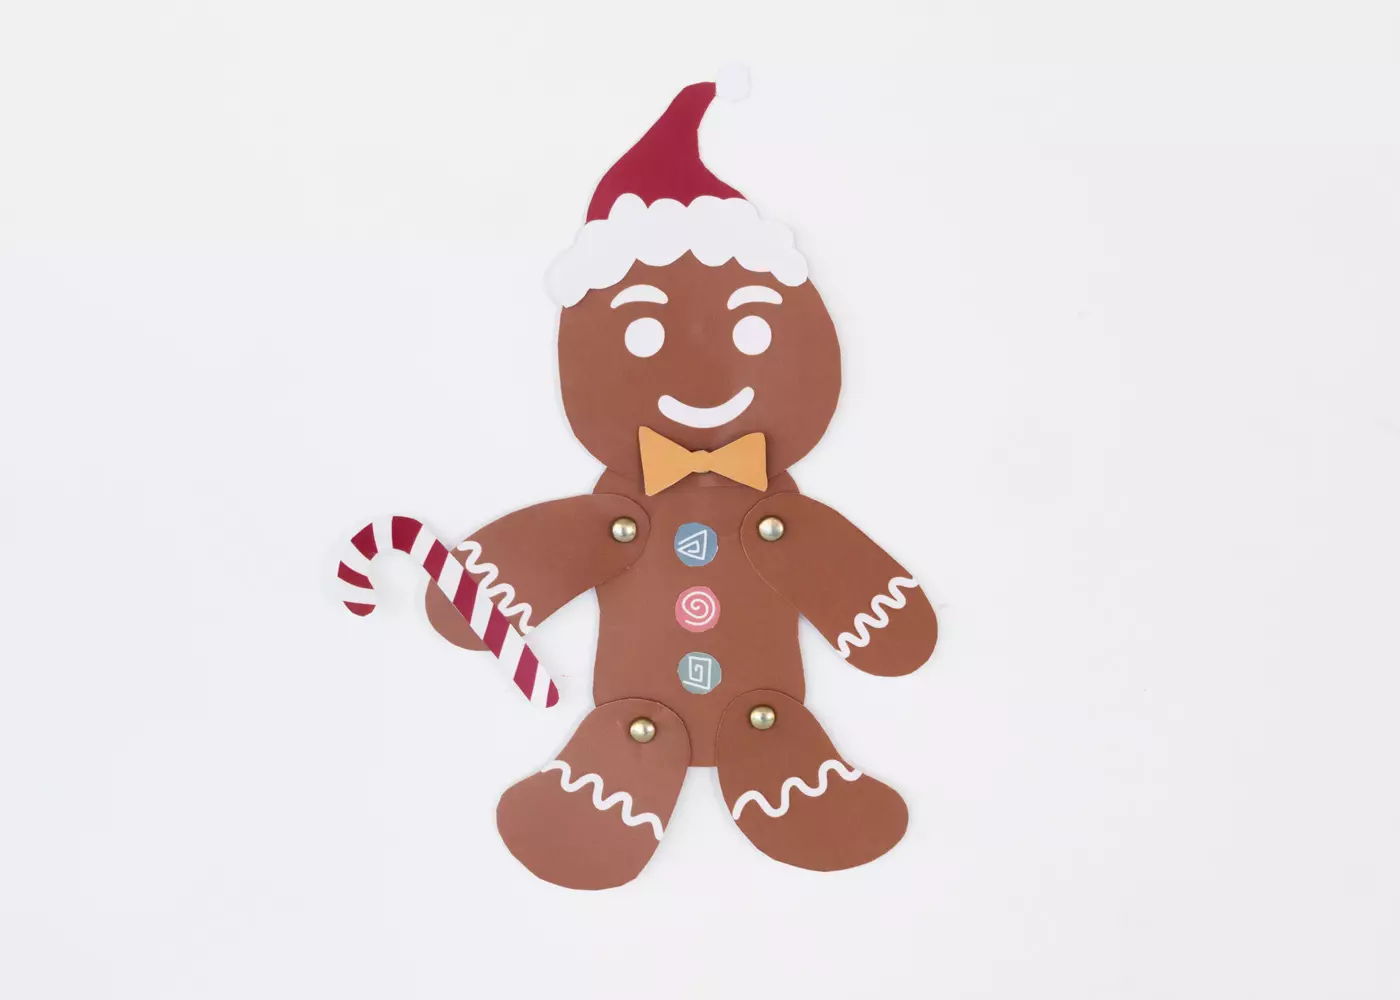 Making gingerbread men - sweet decorations for the Christmas season